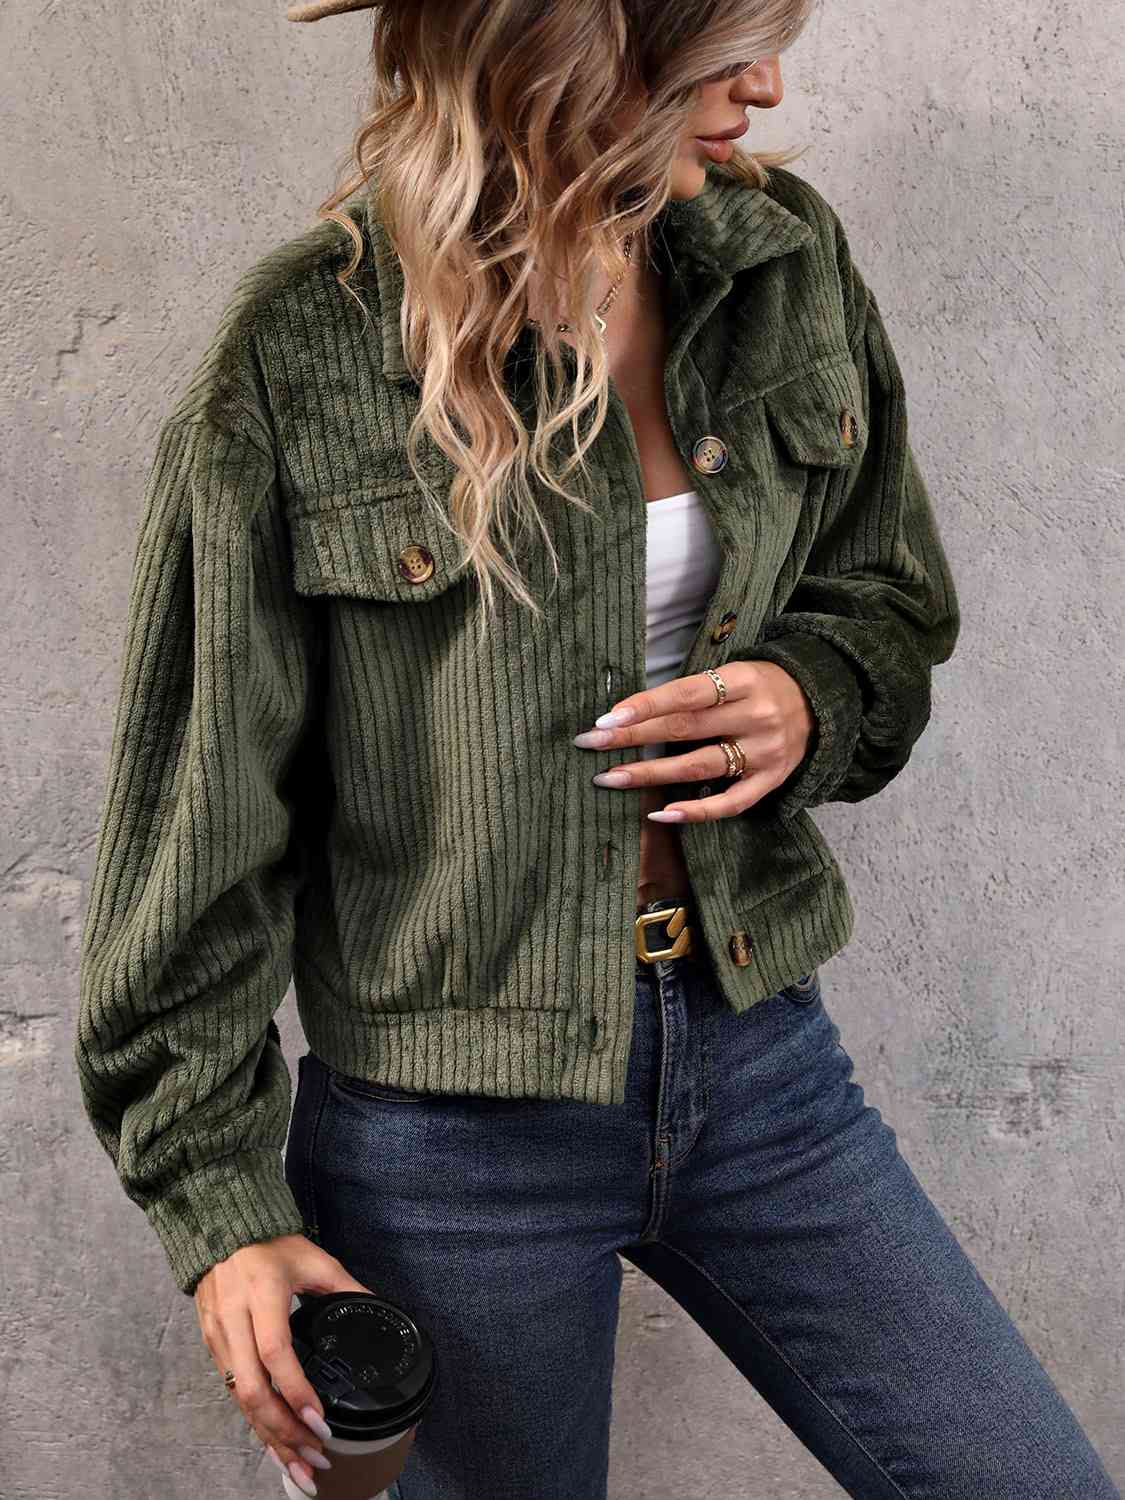 Collared Neck Button Front Jacket with Pockets - Fashion Girl Online Store